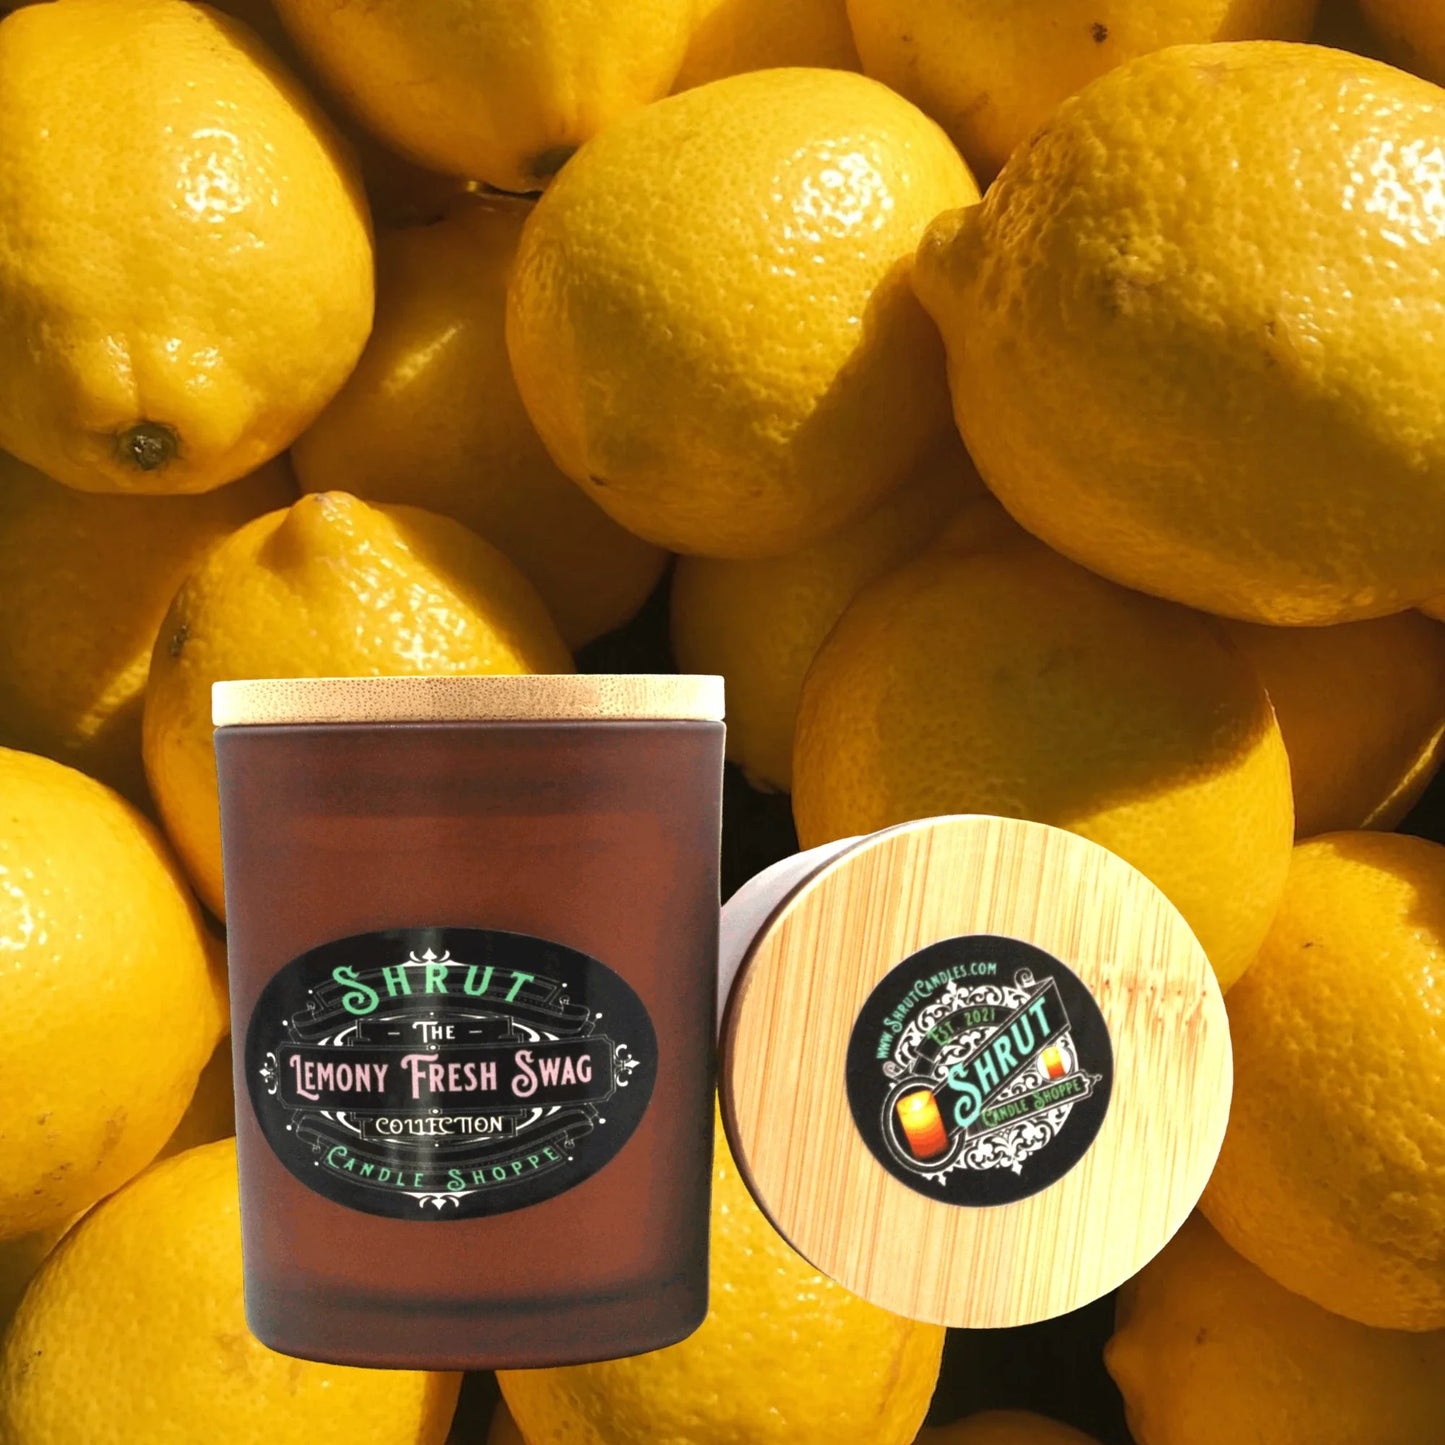 Lemony Fresh Swag Scented Candle - The Ultimate Sensory Pick-me-up